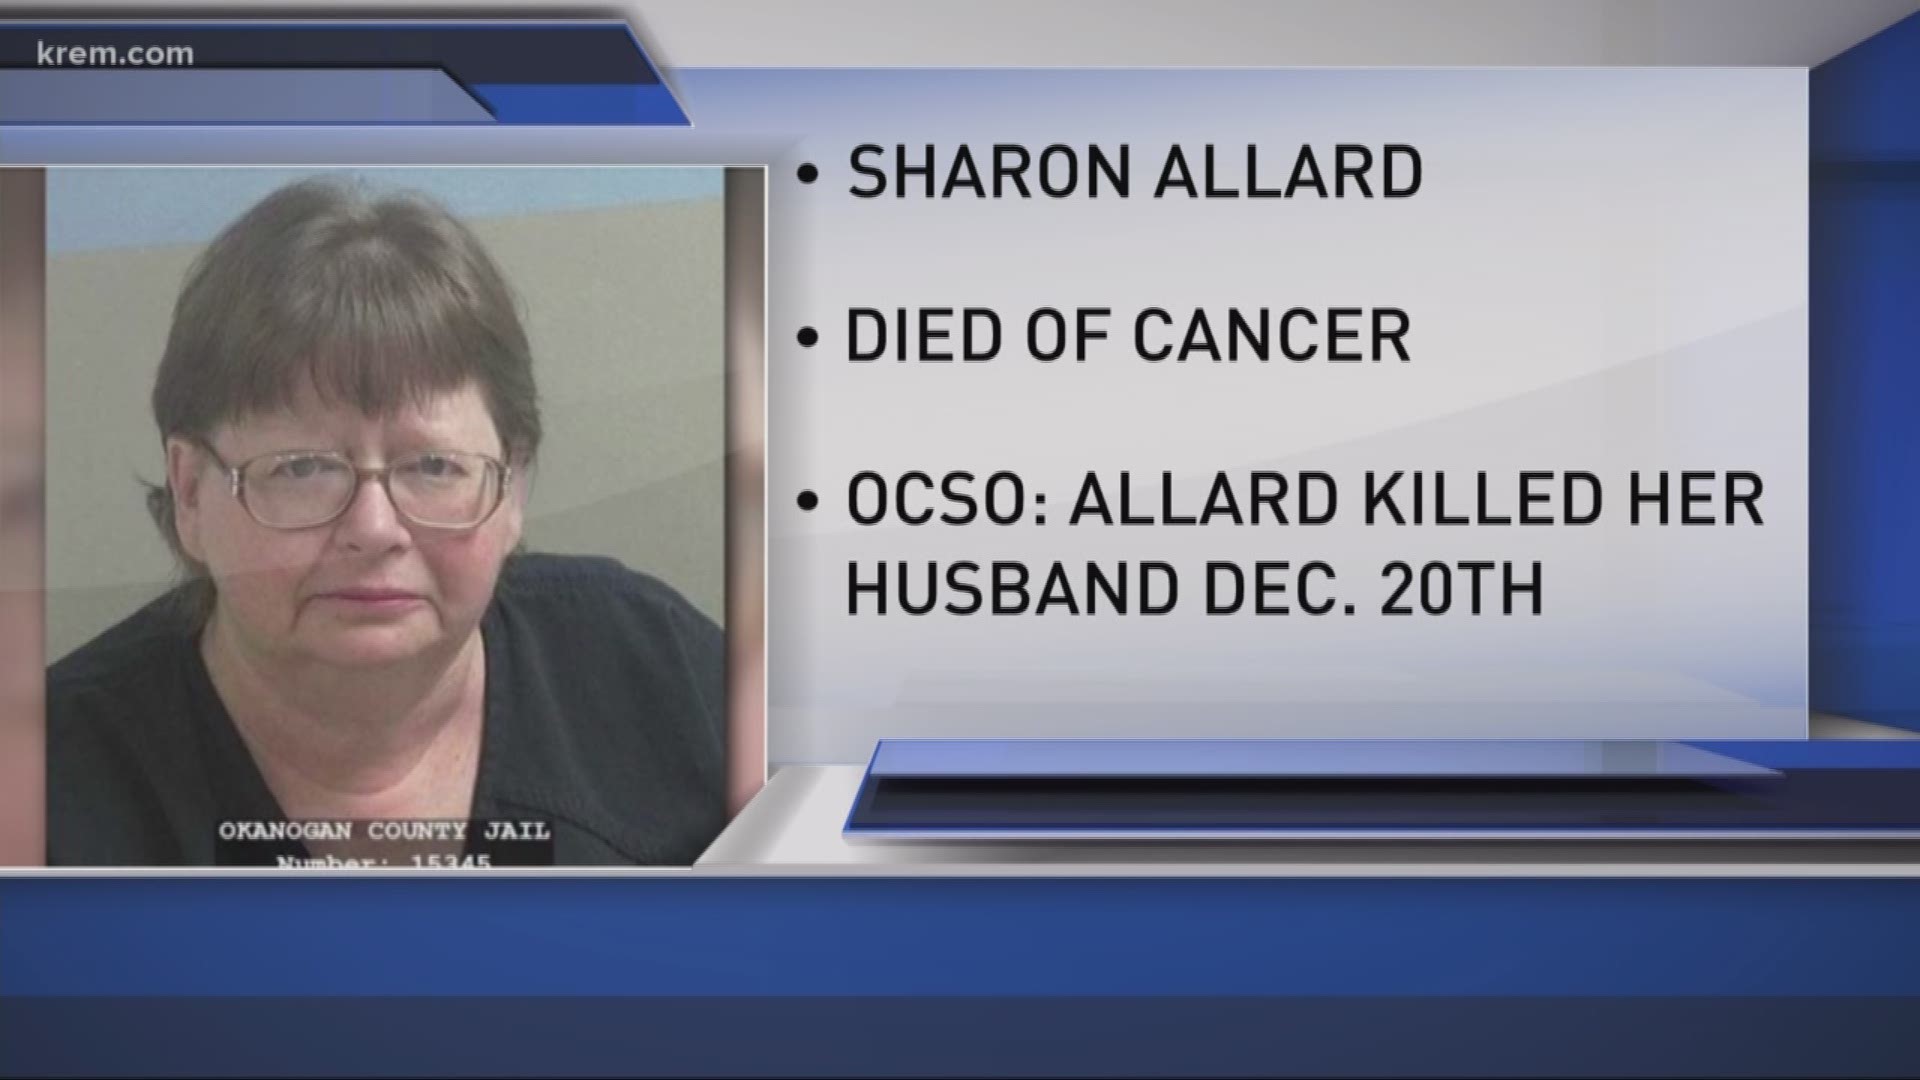 Sharon Allard was facing murder charges in the death of Daniel Allard. The Okanogan County Sheriff's Office said they believed the Sharon shot Daniel after an argument took place in their home.